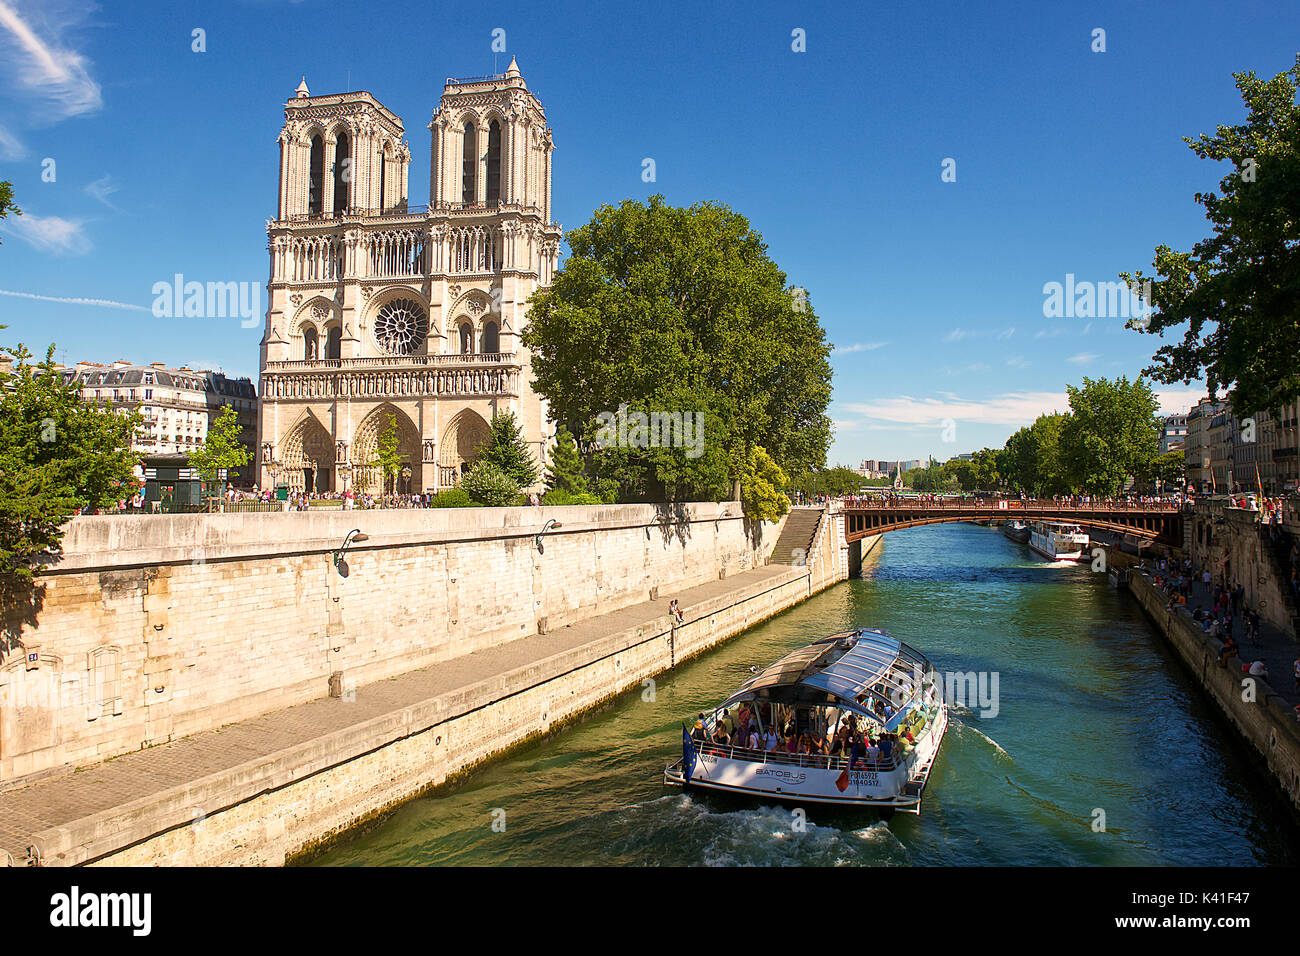 Notre Dame Cathedral, Paris, France Stock Photo